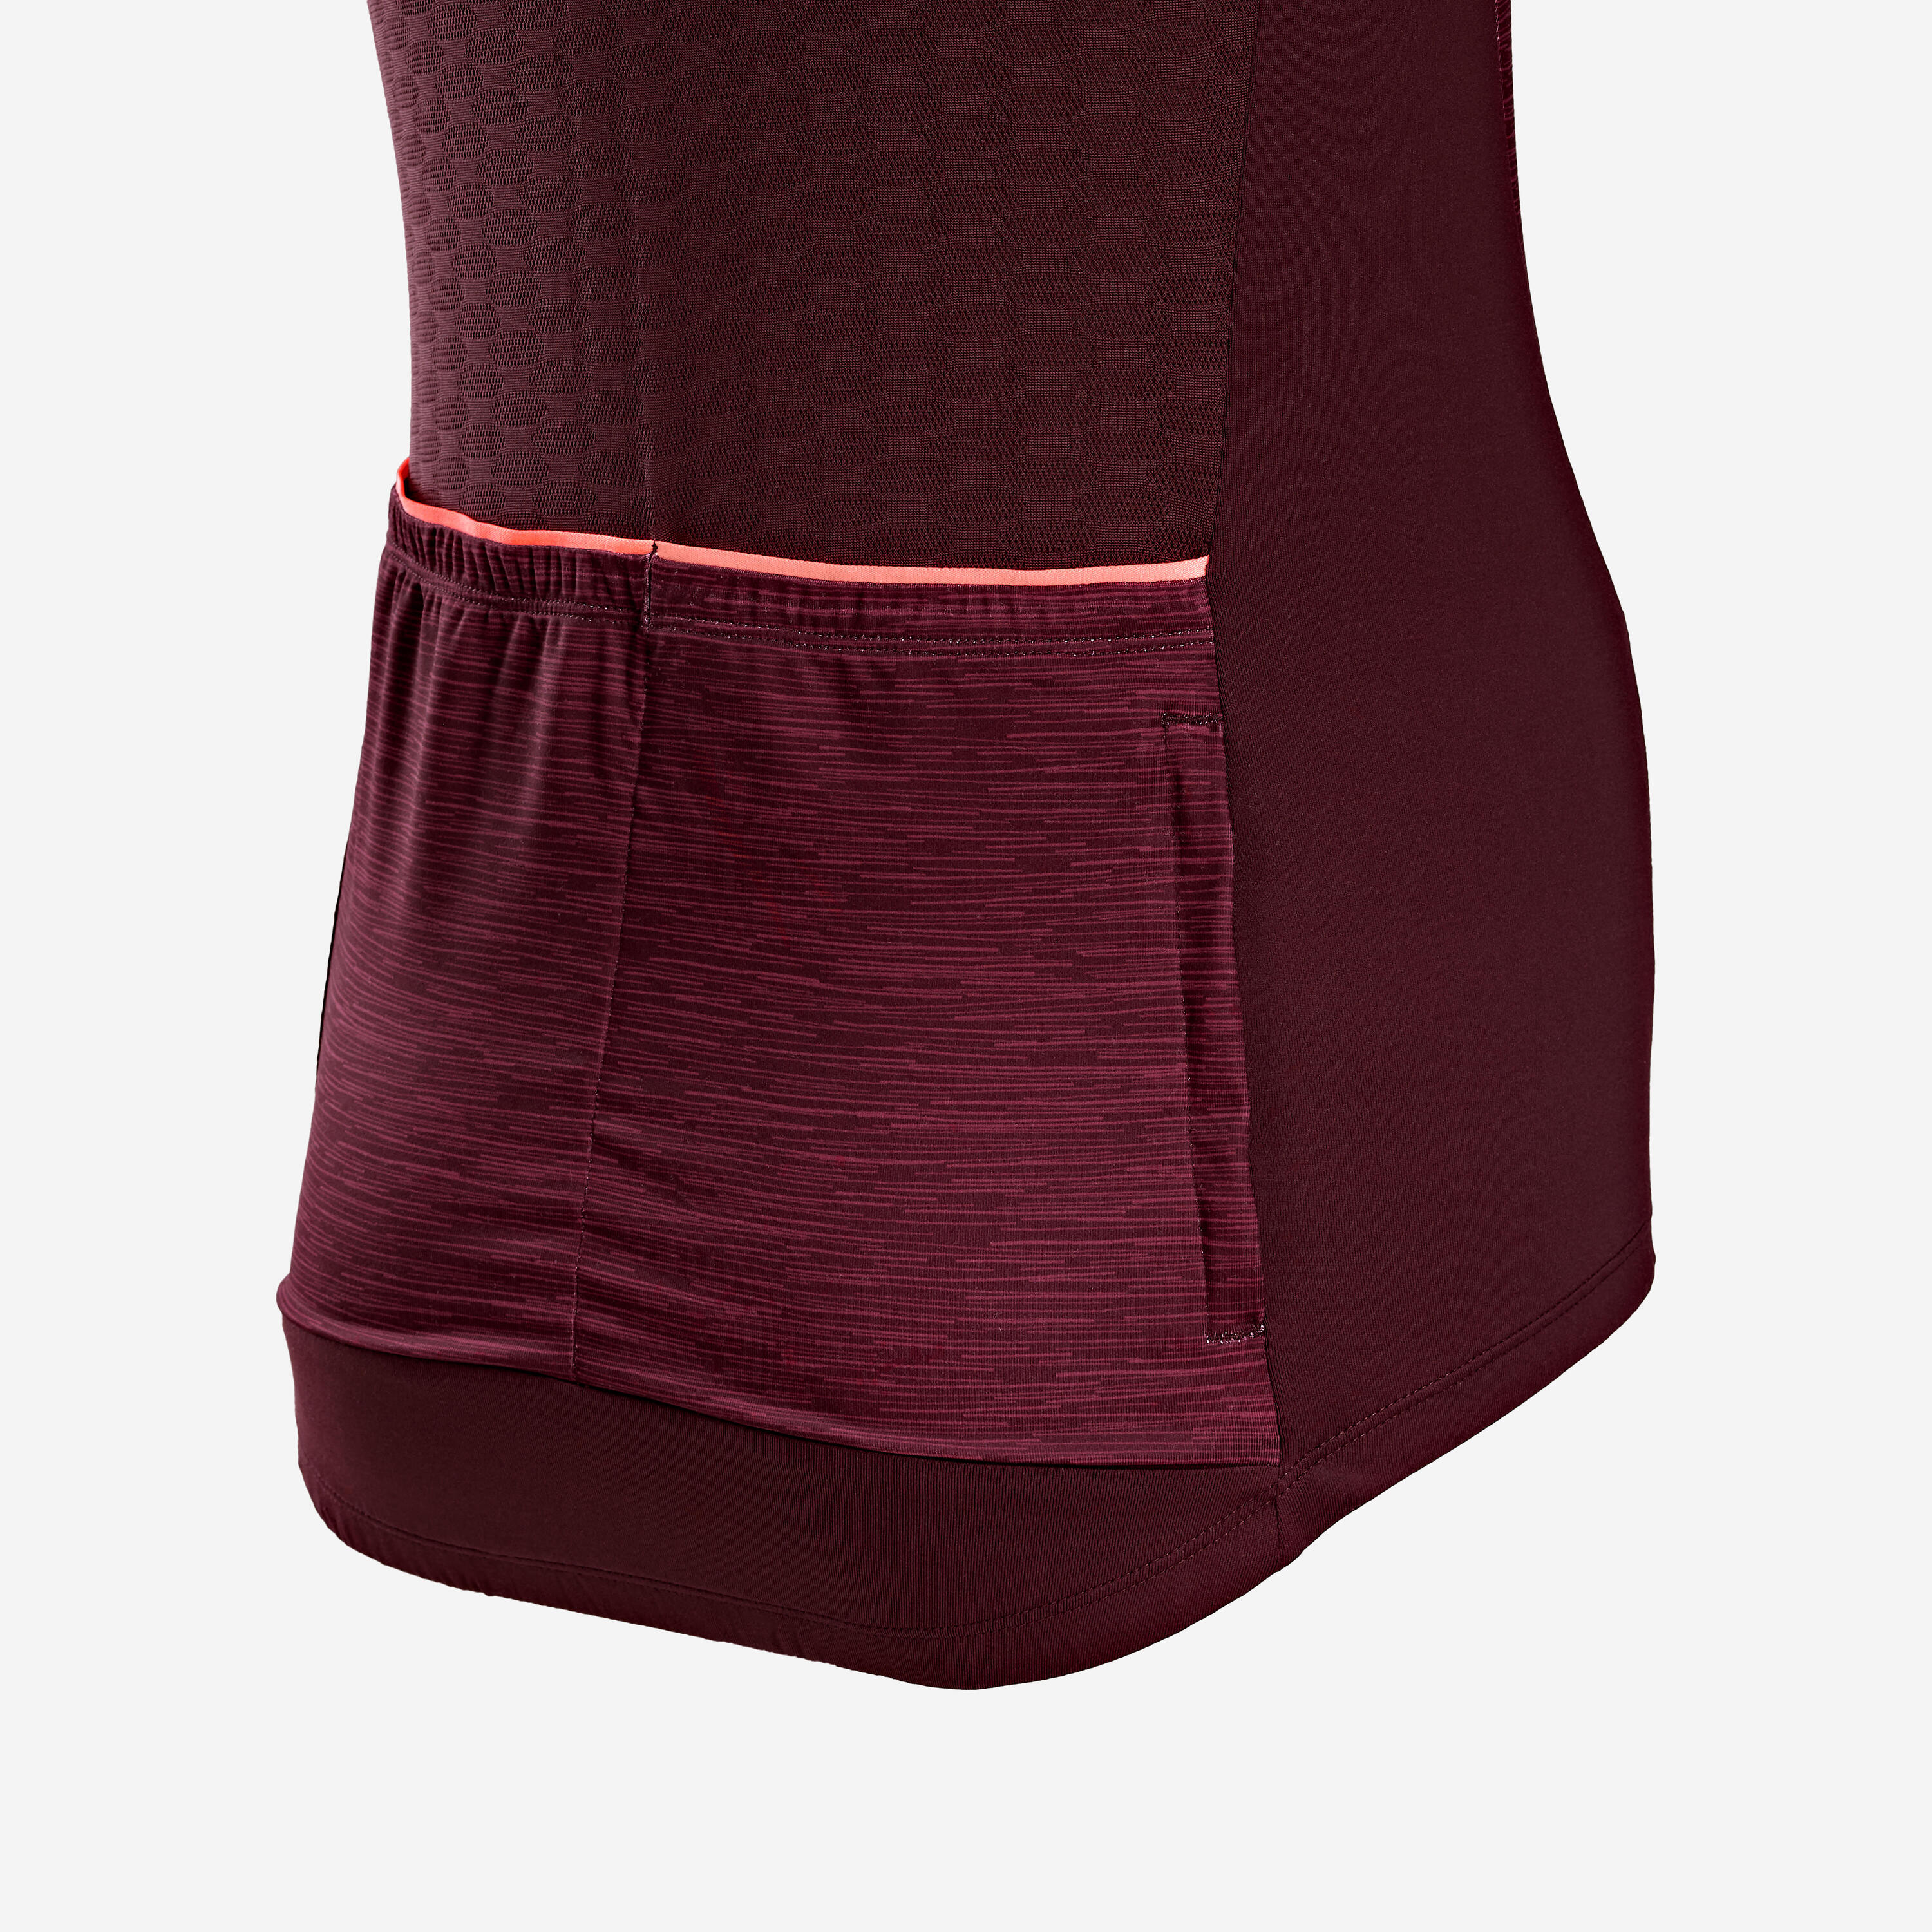 Women's Short-Sleeved Road Cycling Jersey 500 - Burgundy 4/7